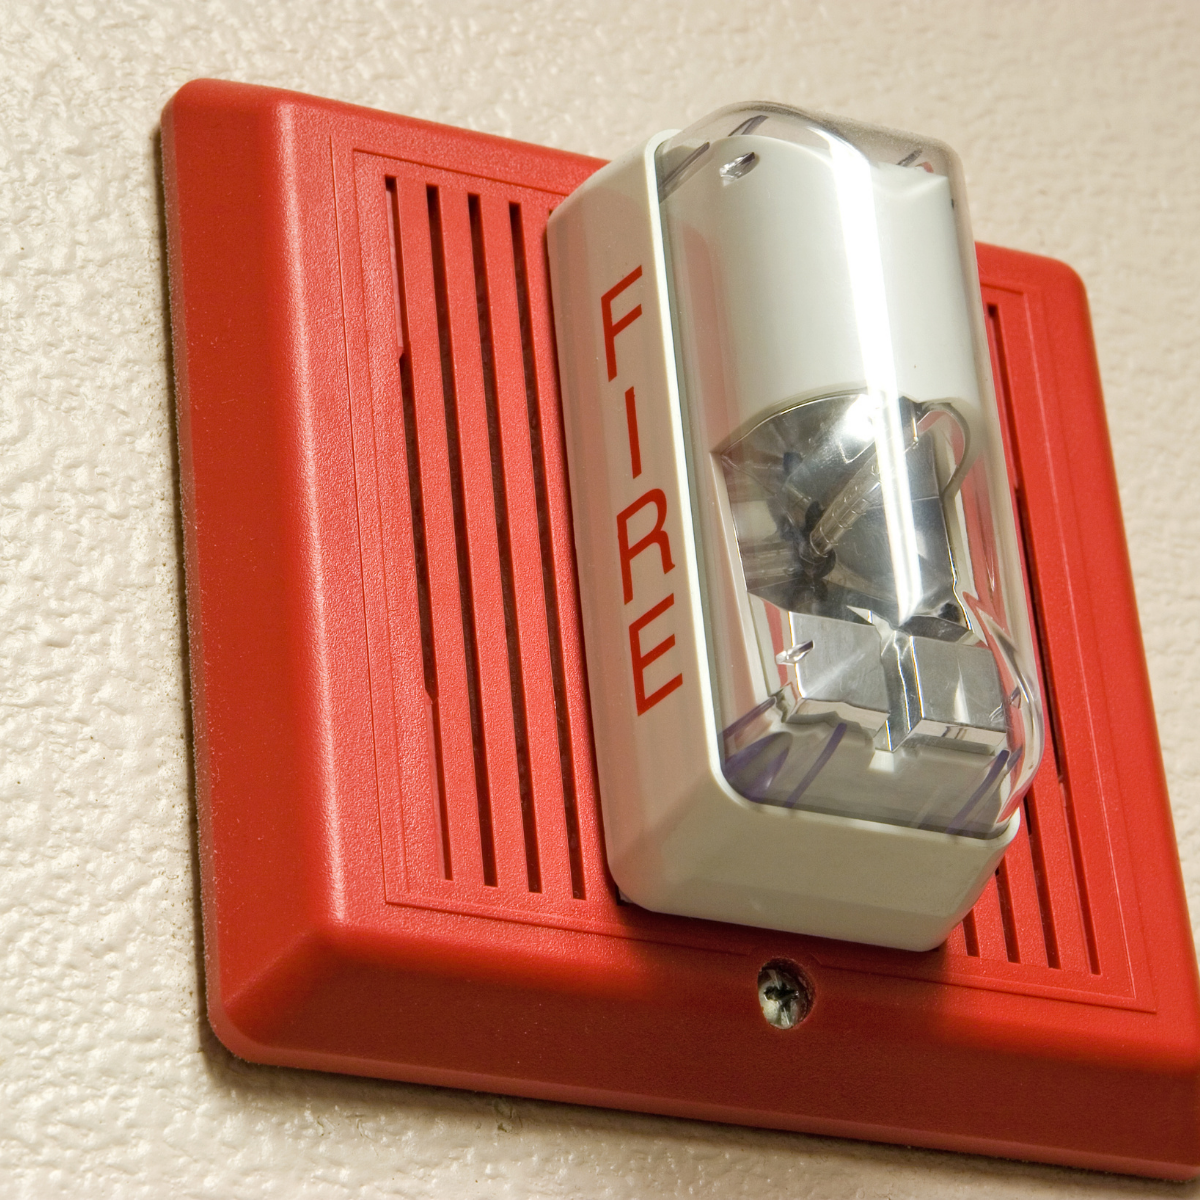 Safety First: Ensuring Protection with Professional Fire Alarm Installation